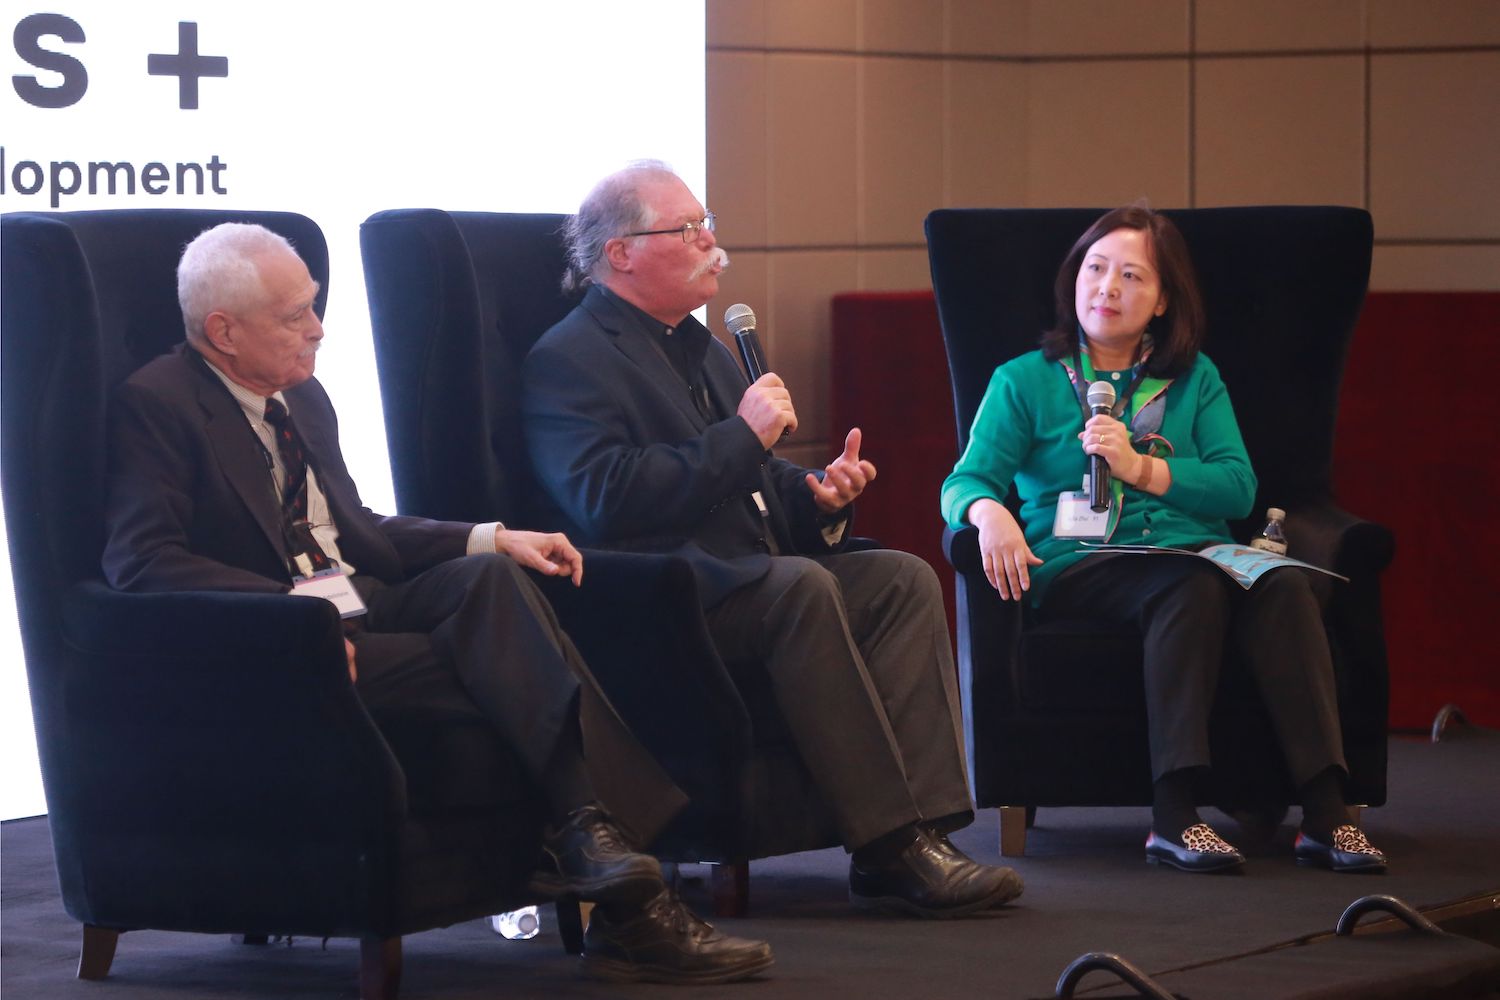 At the second annual Liberal Arts + forum in Beijing on Oct. 19, from left, Richard Adelstein, the Woodhouse/Sysco Professor of Economics, and Barry Chernoff, the Robert Schumann Professor of Environmental Studies, spoke on a panel moderated by Julia Zhu '91 about Wesleyan's unique interdisciplinary approach to teaching economics and environmental studies.